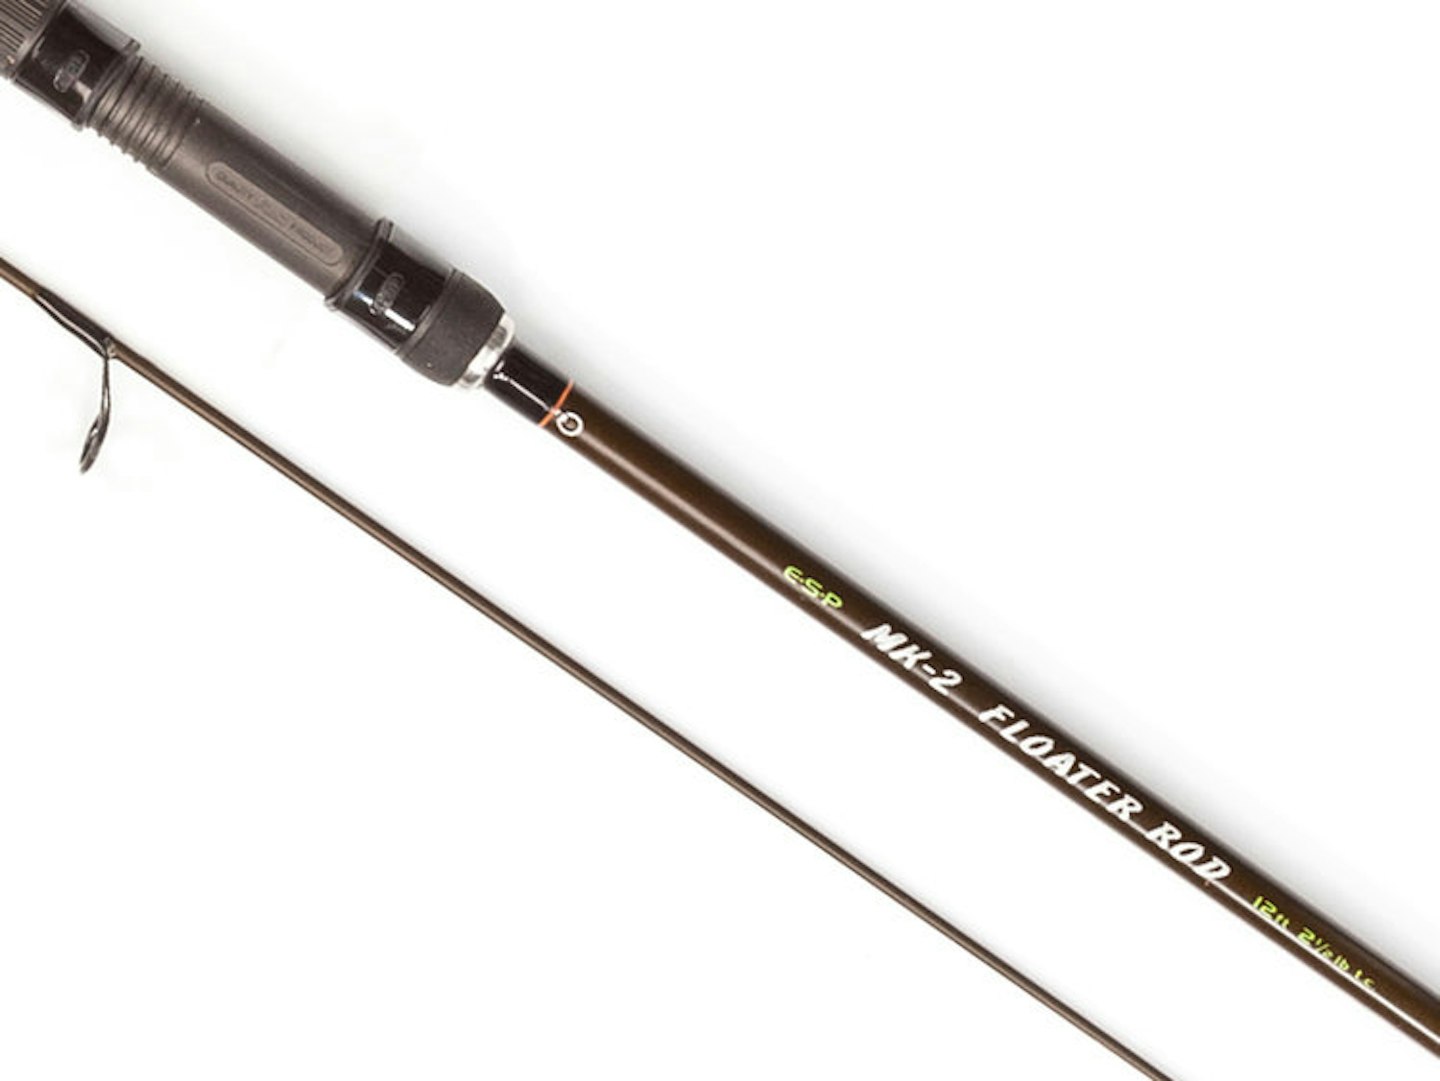 BUYER'S GUIDE TO THE BEST FLOATER FISHING RODS FOR CARP